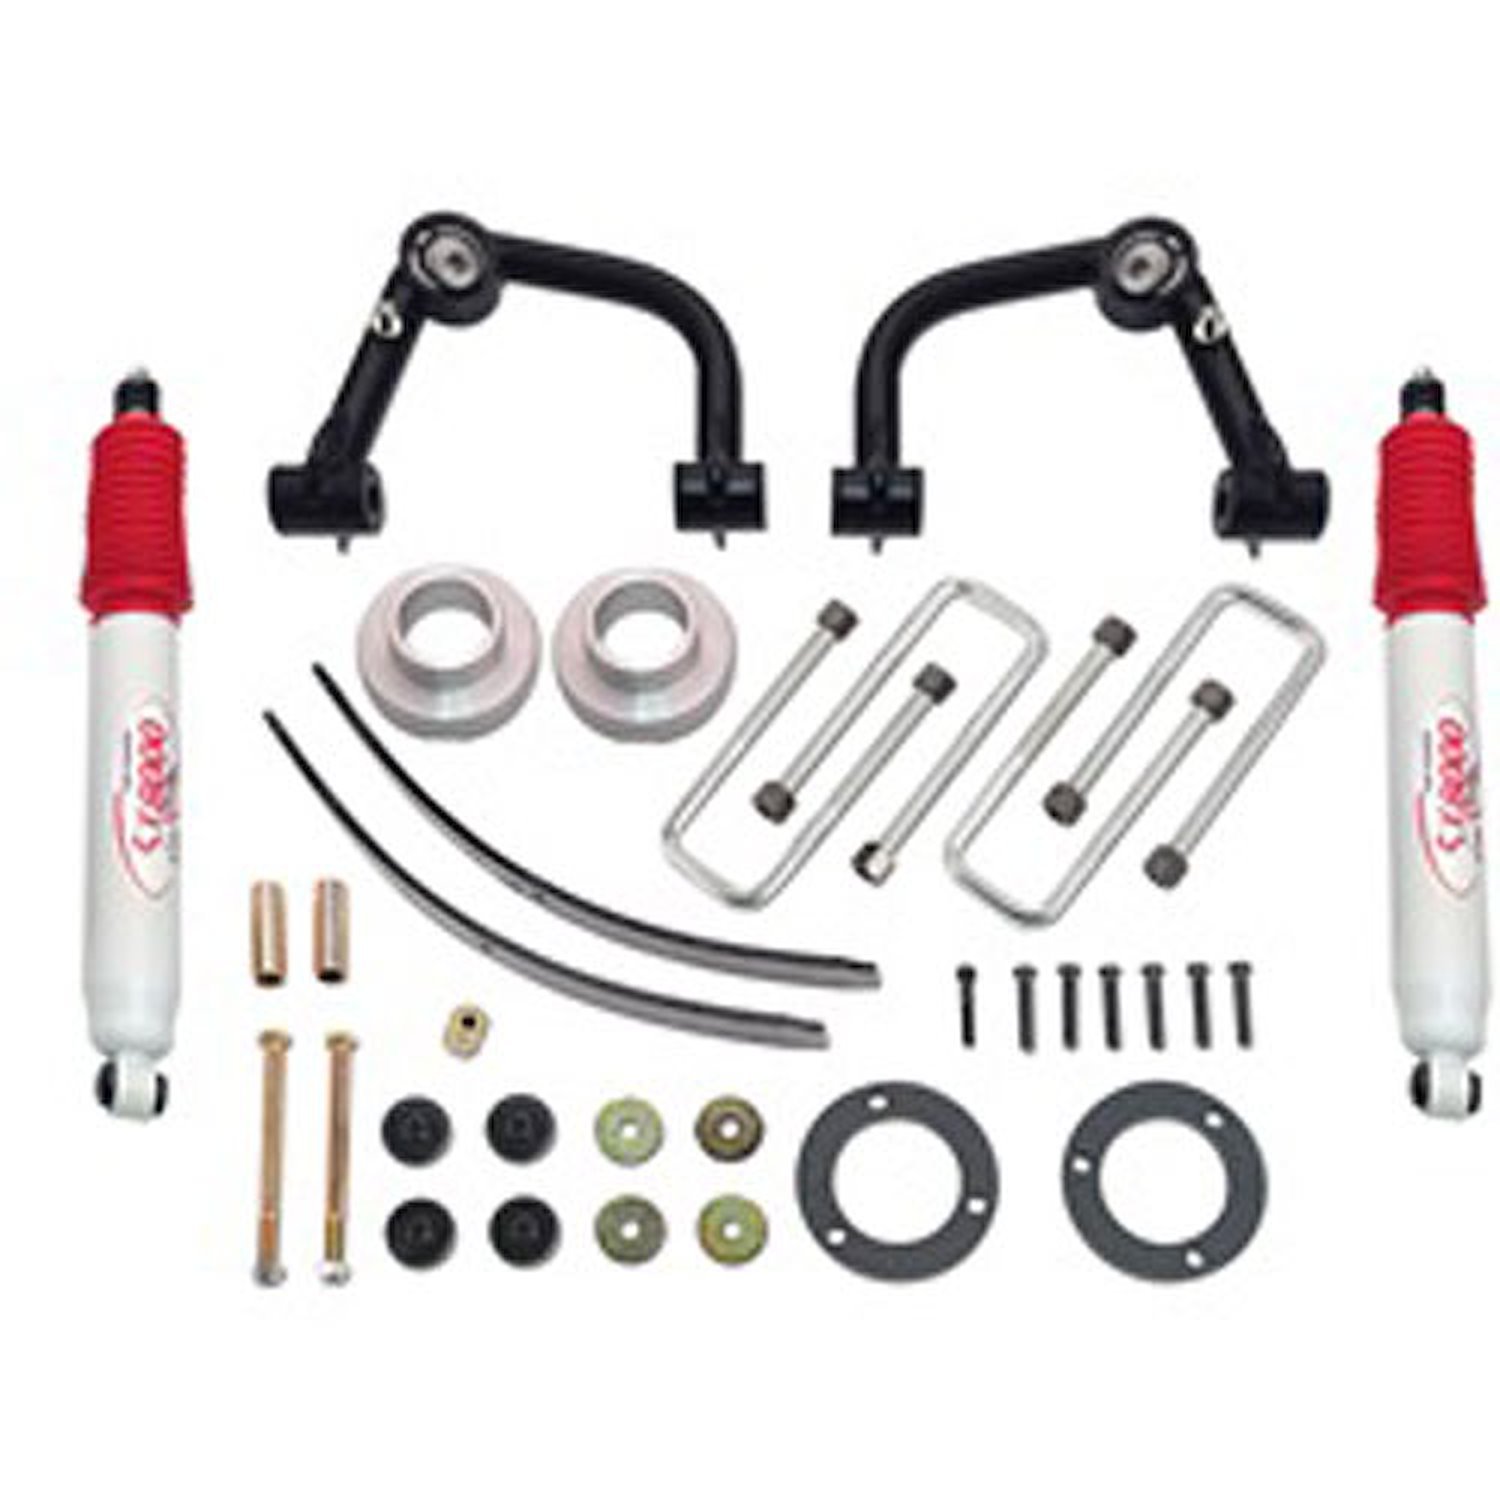 Suspension Lift Kit 2005-14 Toyota Tacoma 4wd & 2wd Pre-Runner